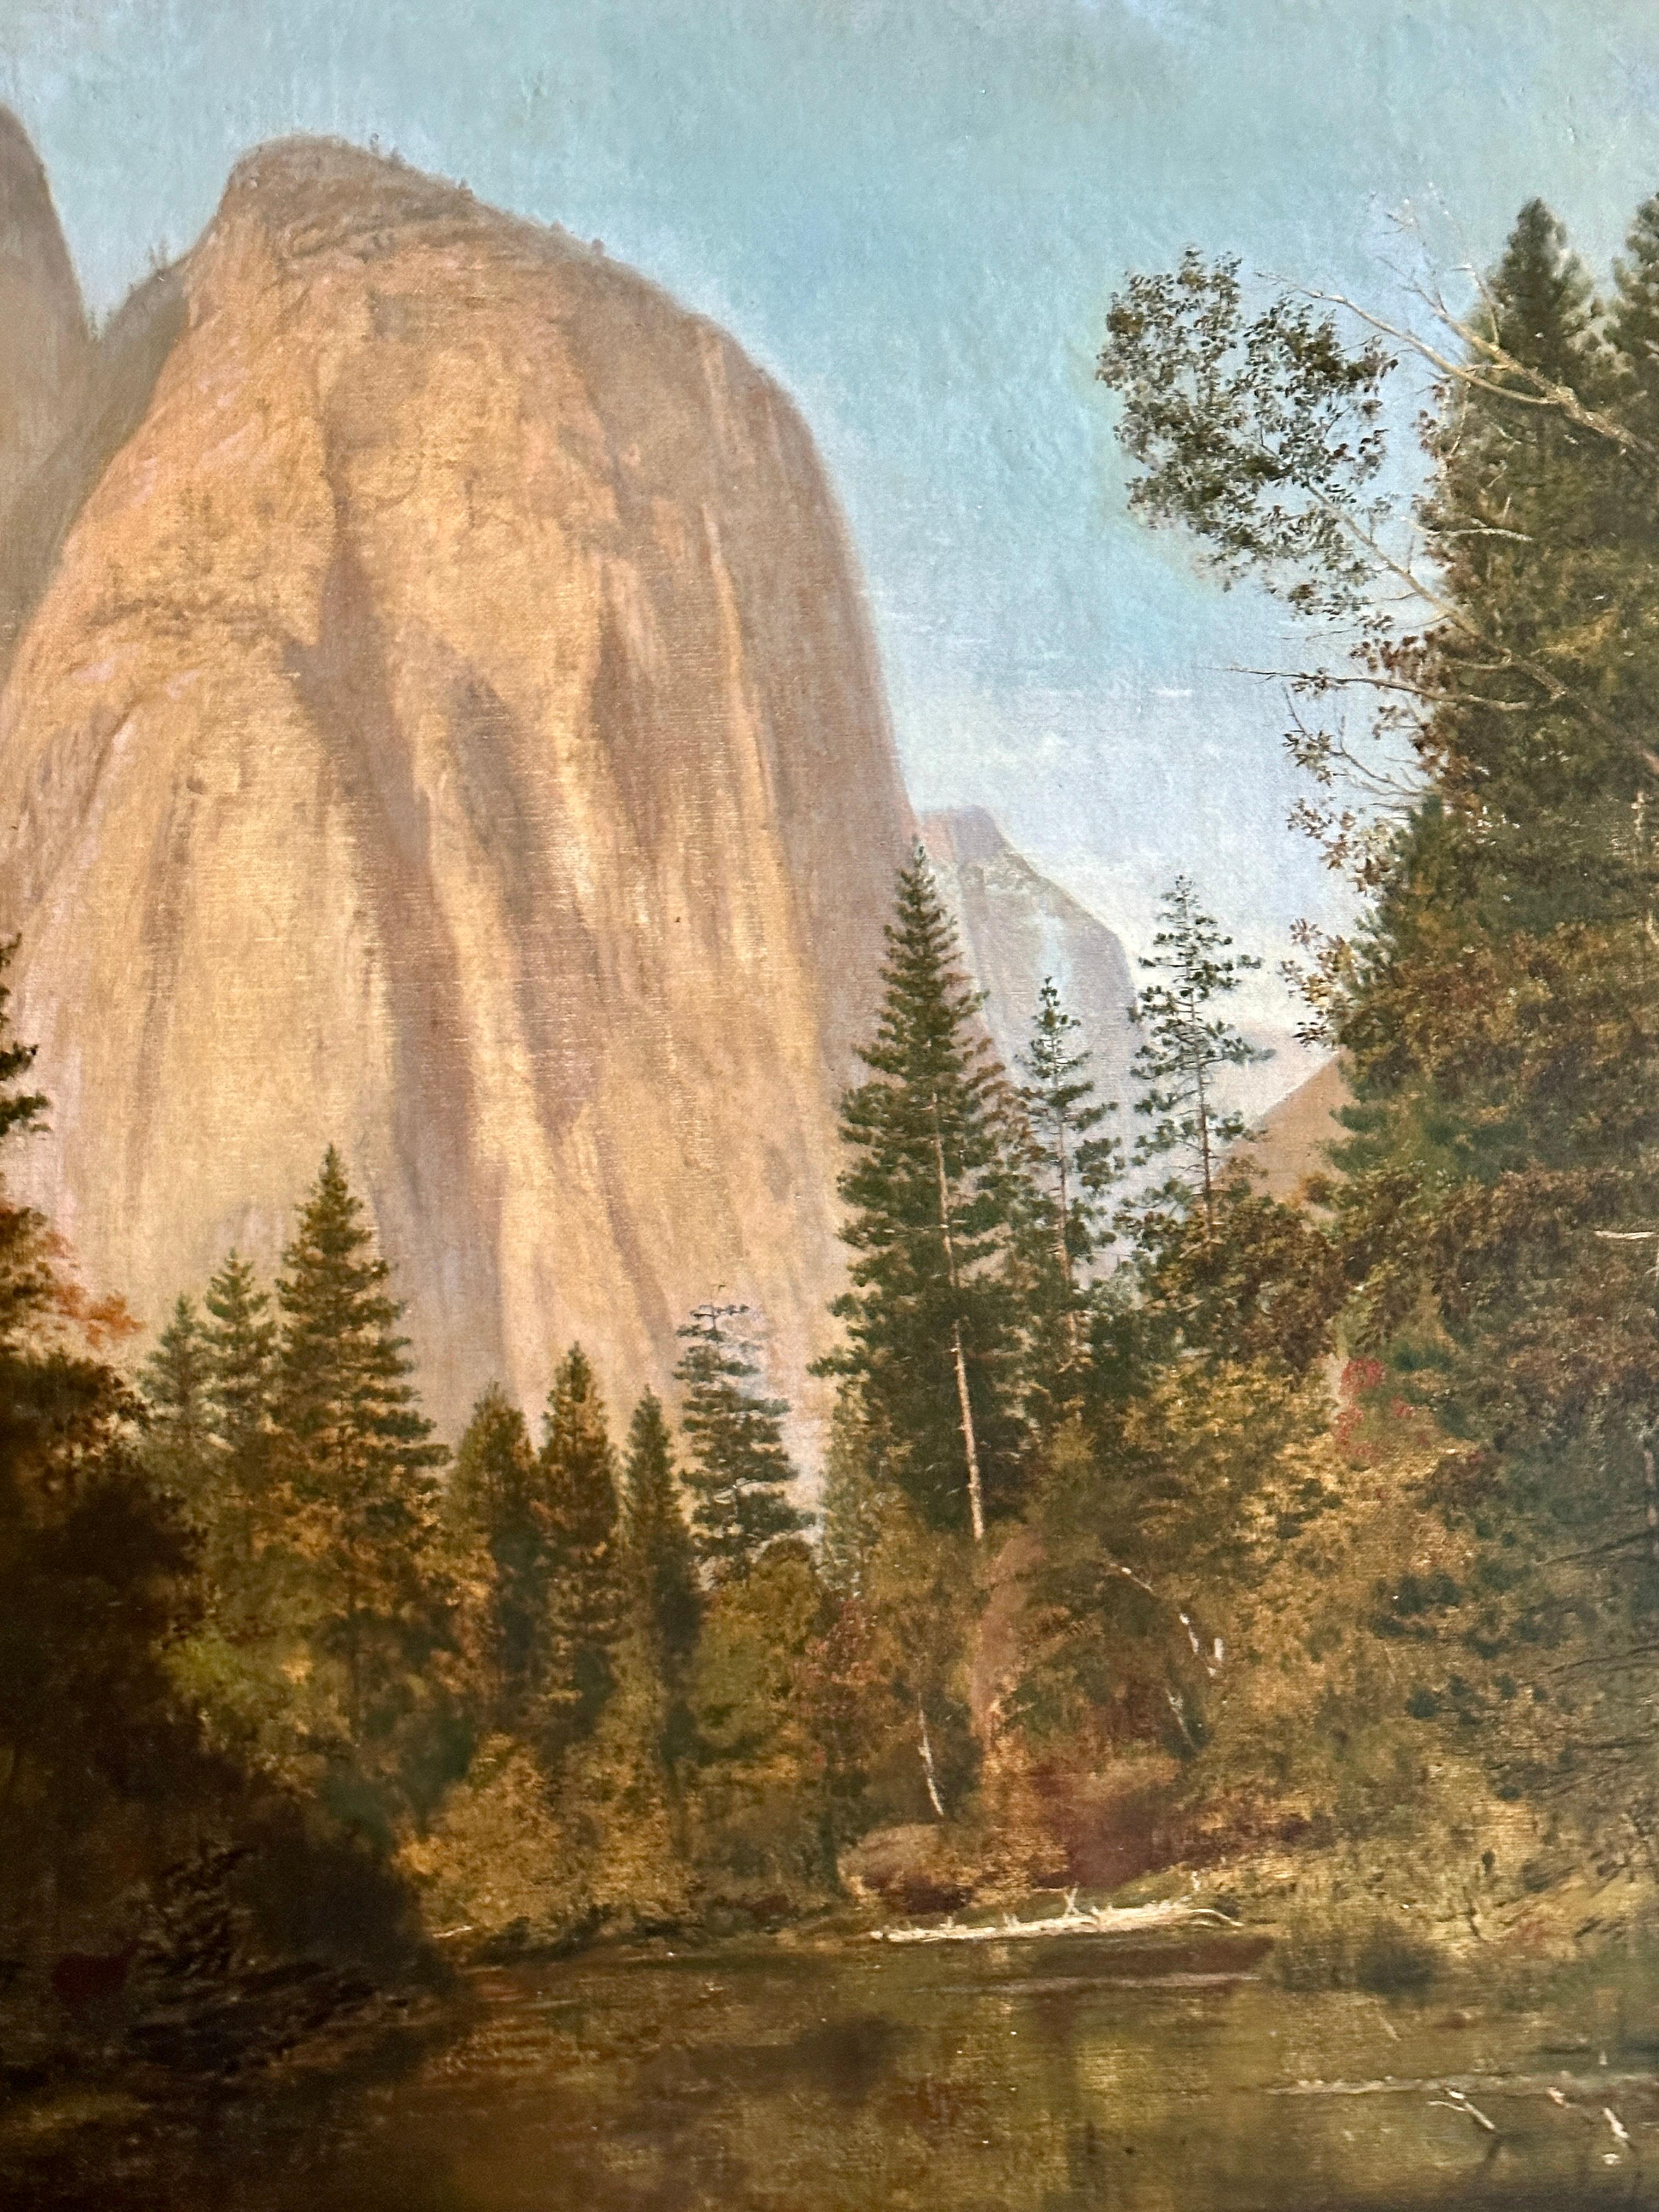 James Reeve Stuart (American, 1834-1915)
El Capitain, 1870
Signed Lower Left
36 x 46 inches
46 x 56 inches

James Reeve Stuart, well-trained portrait painter and teacher, was born in Beaufort, South Carolina, to one of the wealthiest families in the